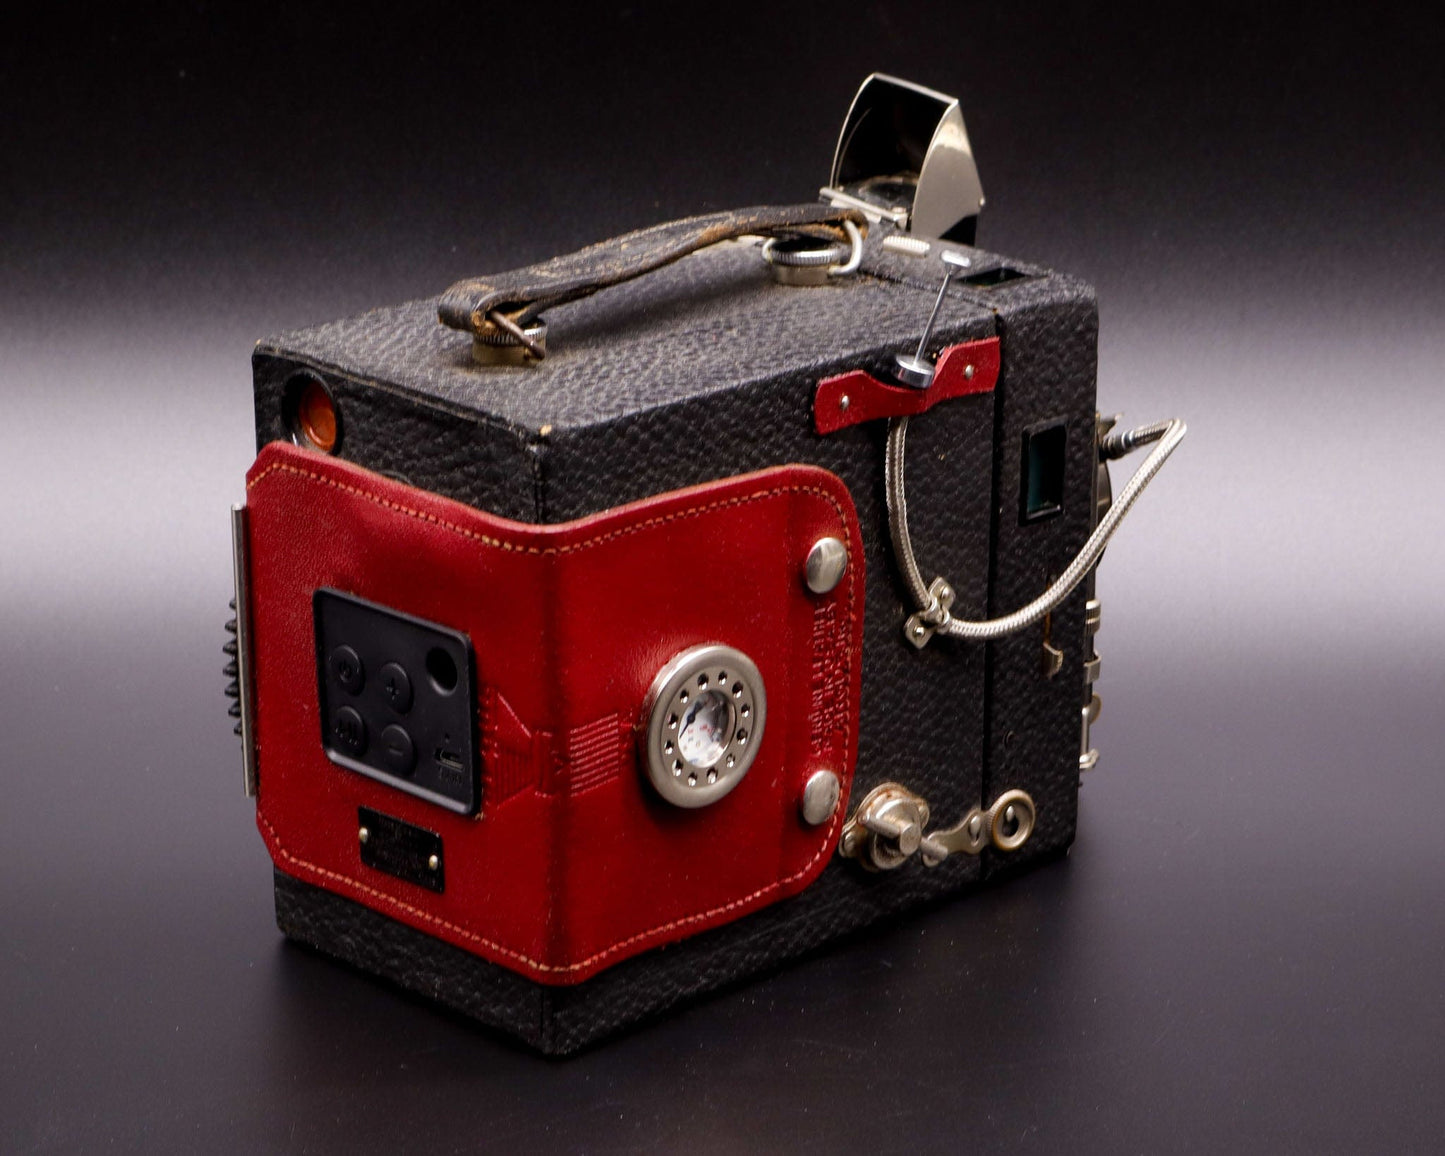 LightAndTimeArt Steampunk Speaker "The Red Baron VI" Steampunk Bluetooth Speaker, Gifts for Geeks, Electronic Audio gadget, signed & numbered artwork